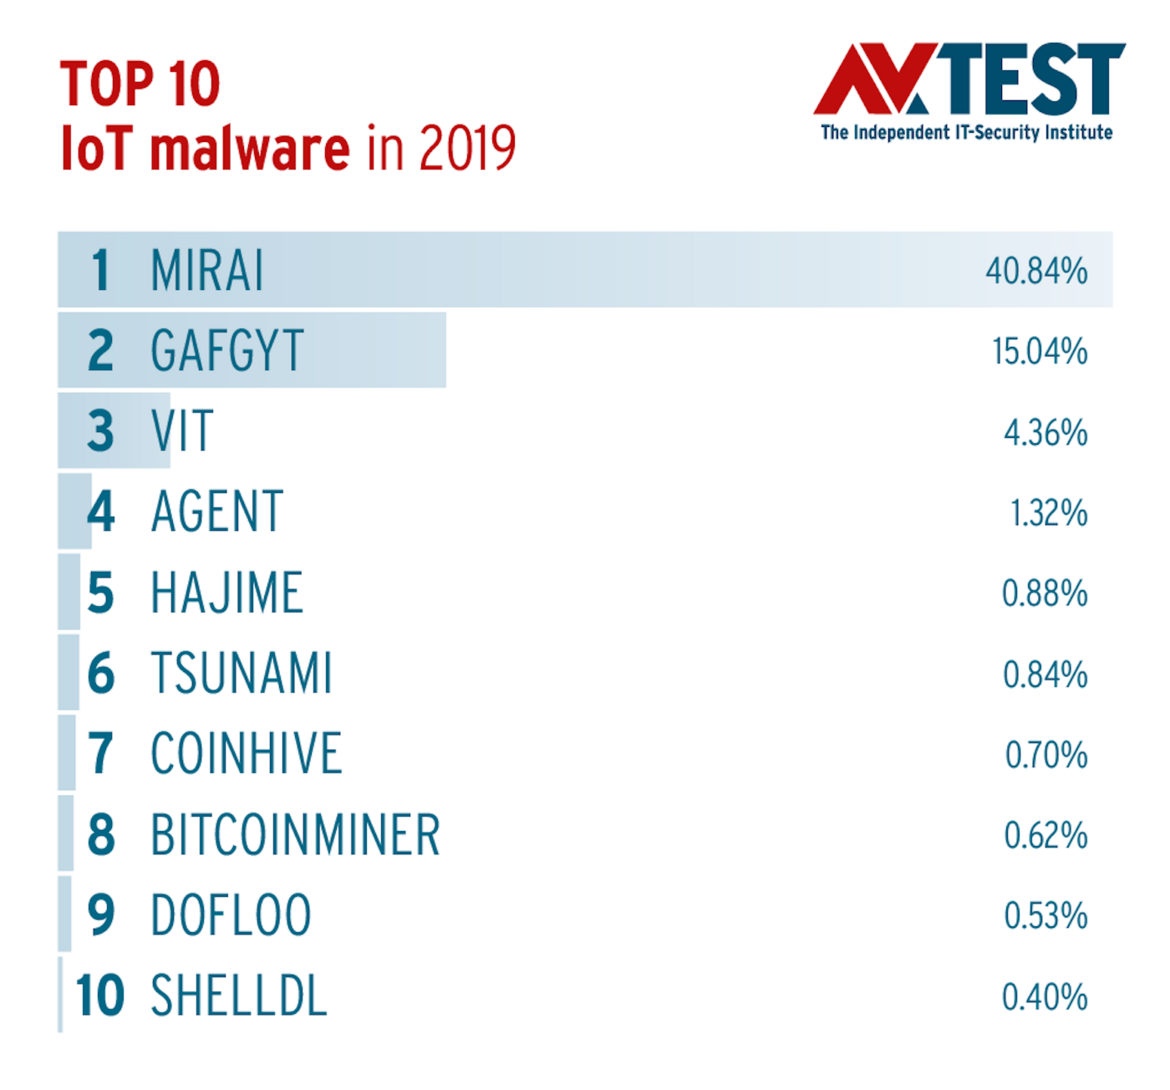 Top 10 IoT Malware in 2019